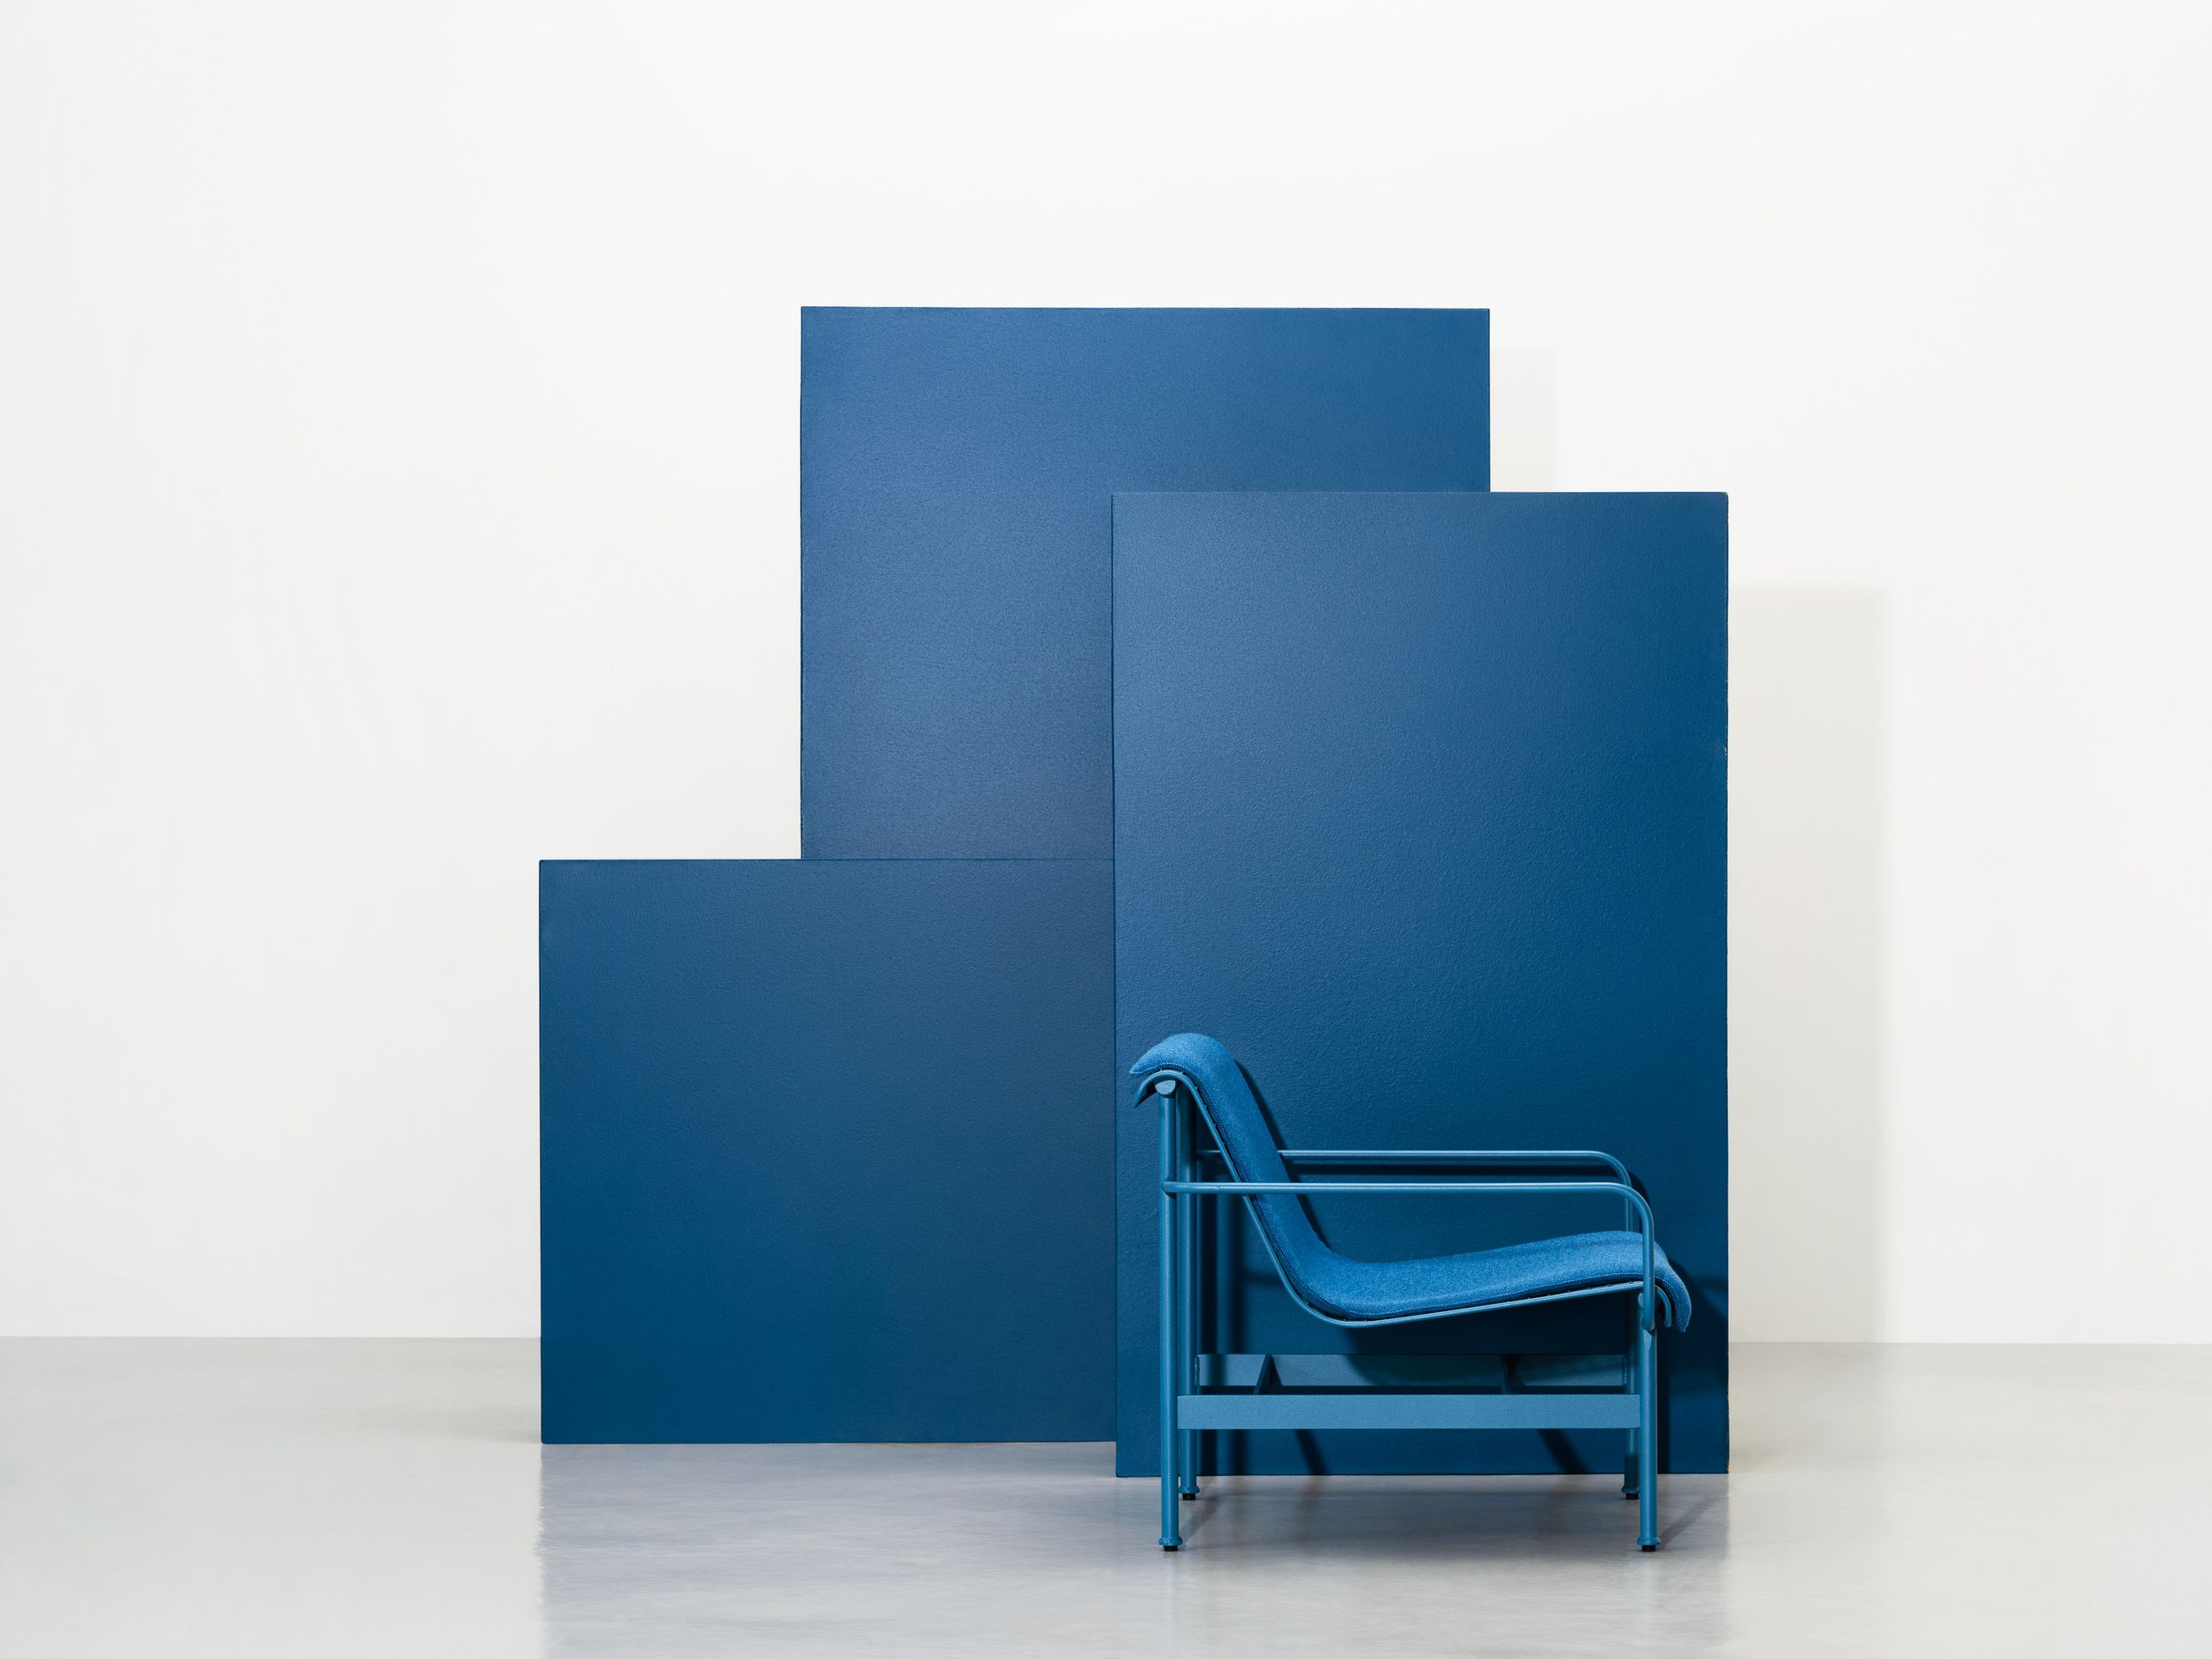 Munch Chair designed by Jonas Stokke and Andreas Engesvik for the Munch Museum in Oslo, blue chair with pillow, side view